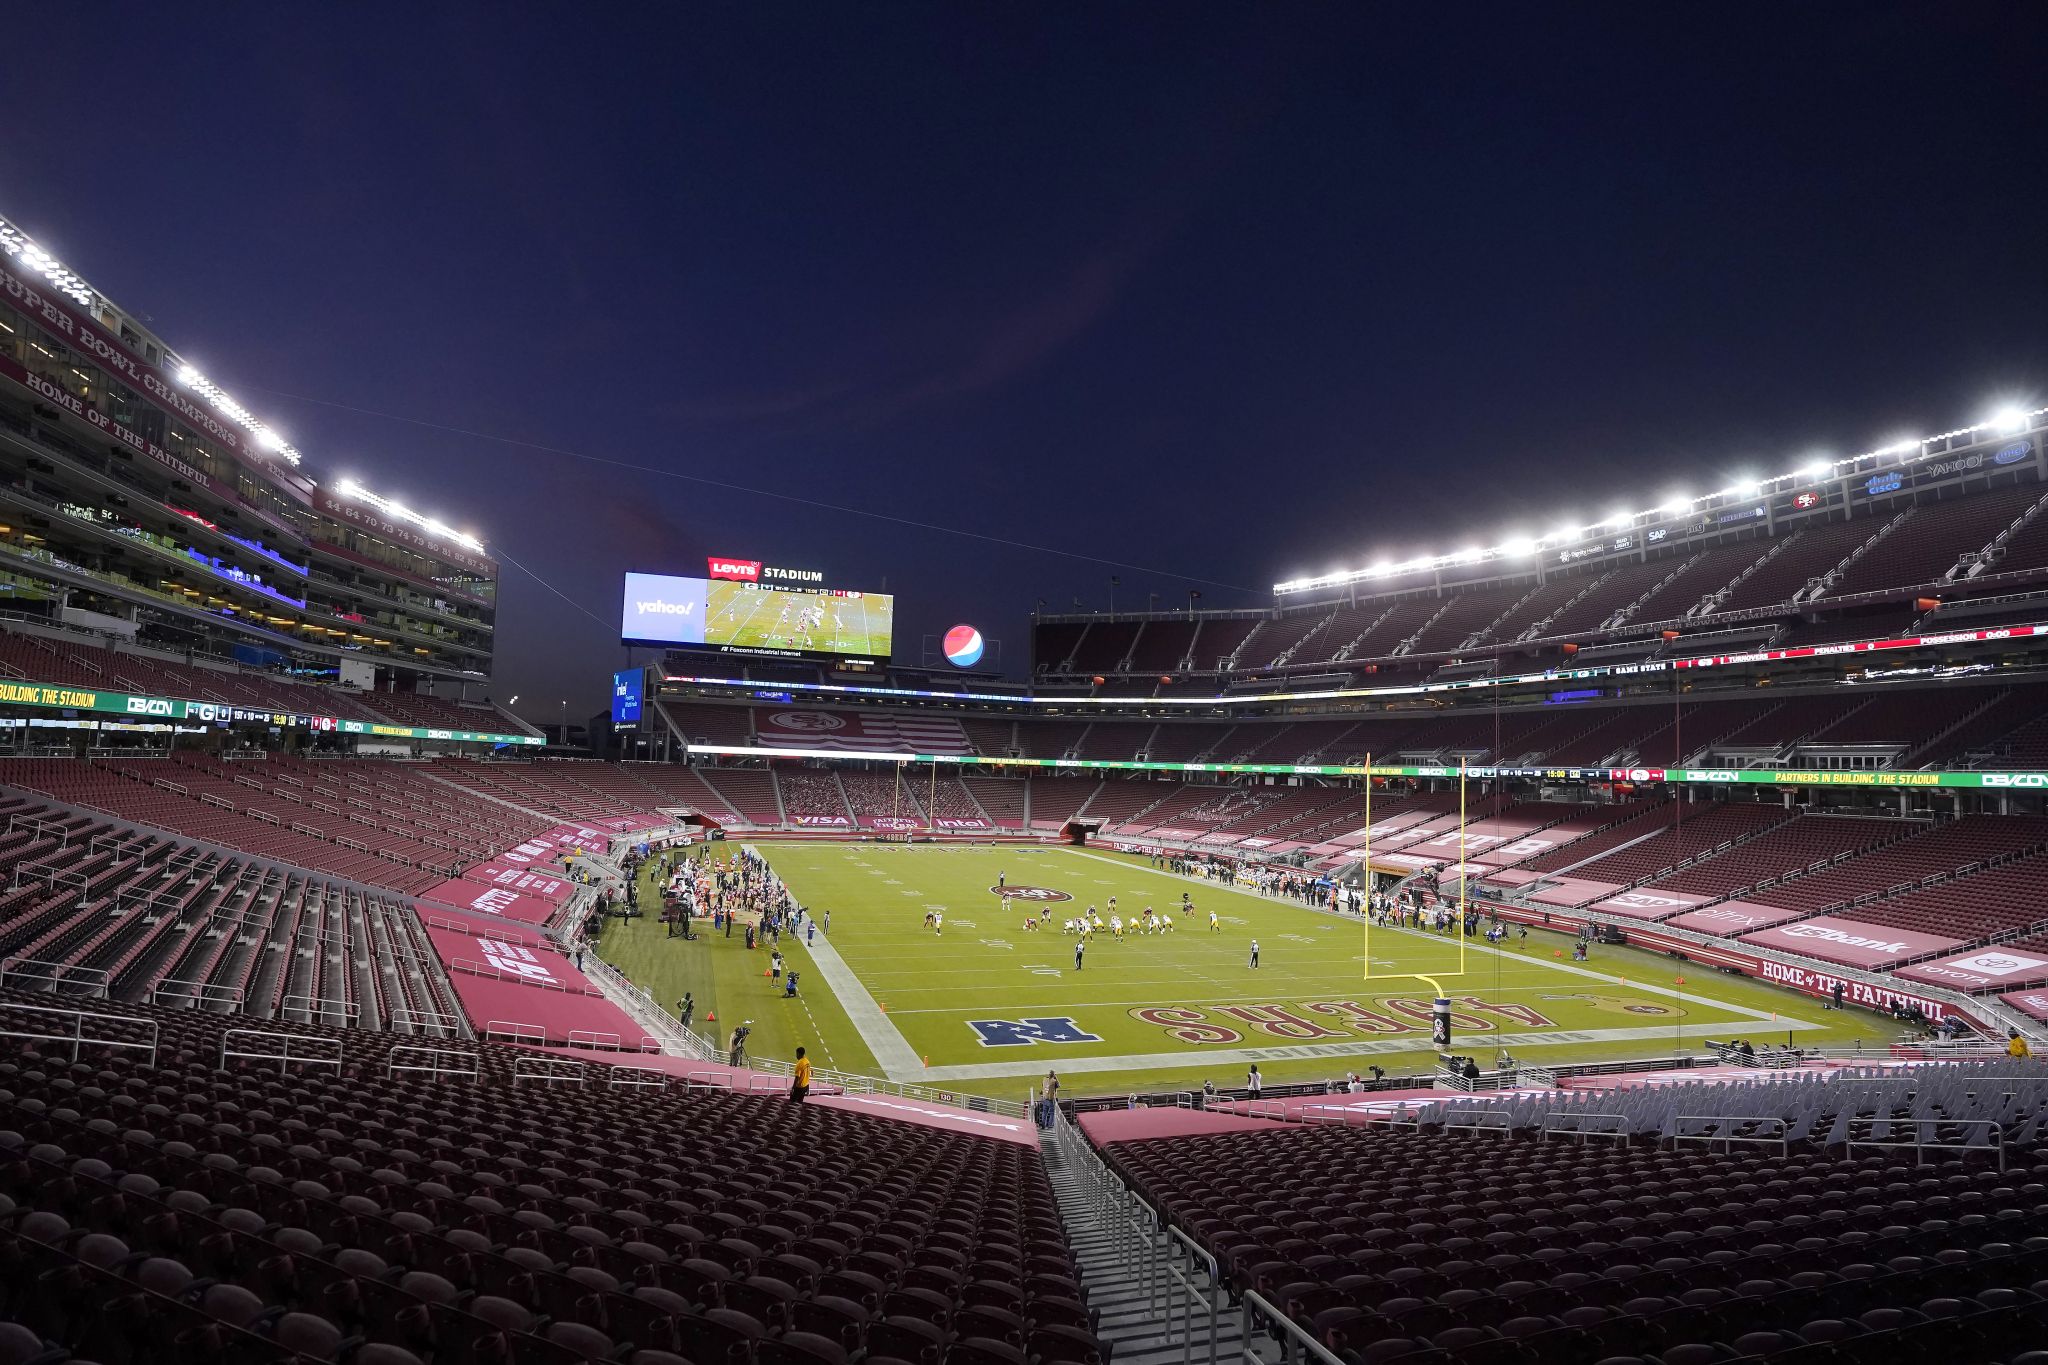 LA klop?  Levi’s Stadium will vaccinate more people a day than Dodger Stadium